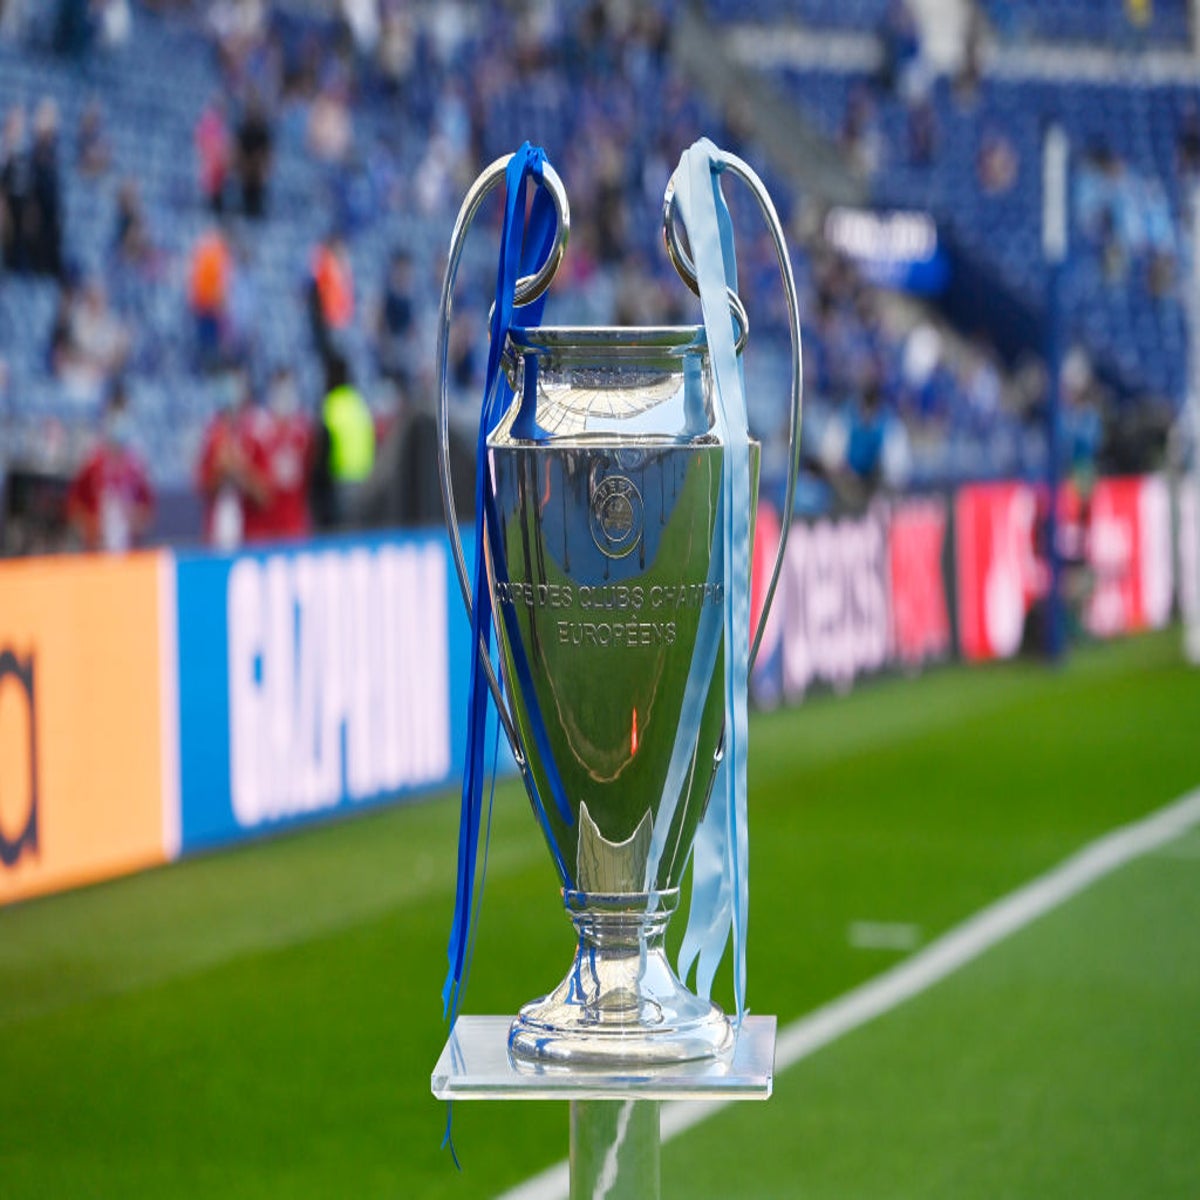 New format for Champions League post-2024: Everything you need to know, UEFA Champions League